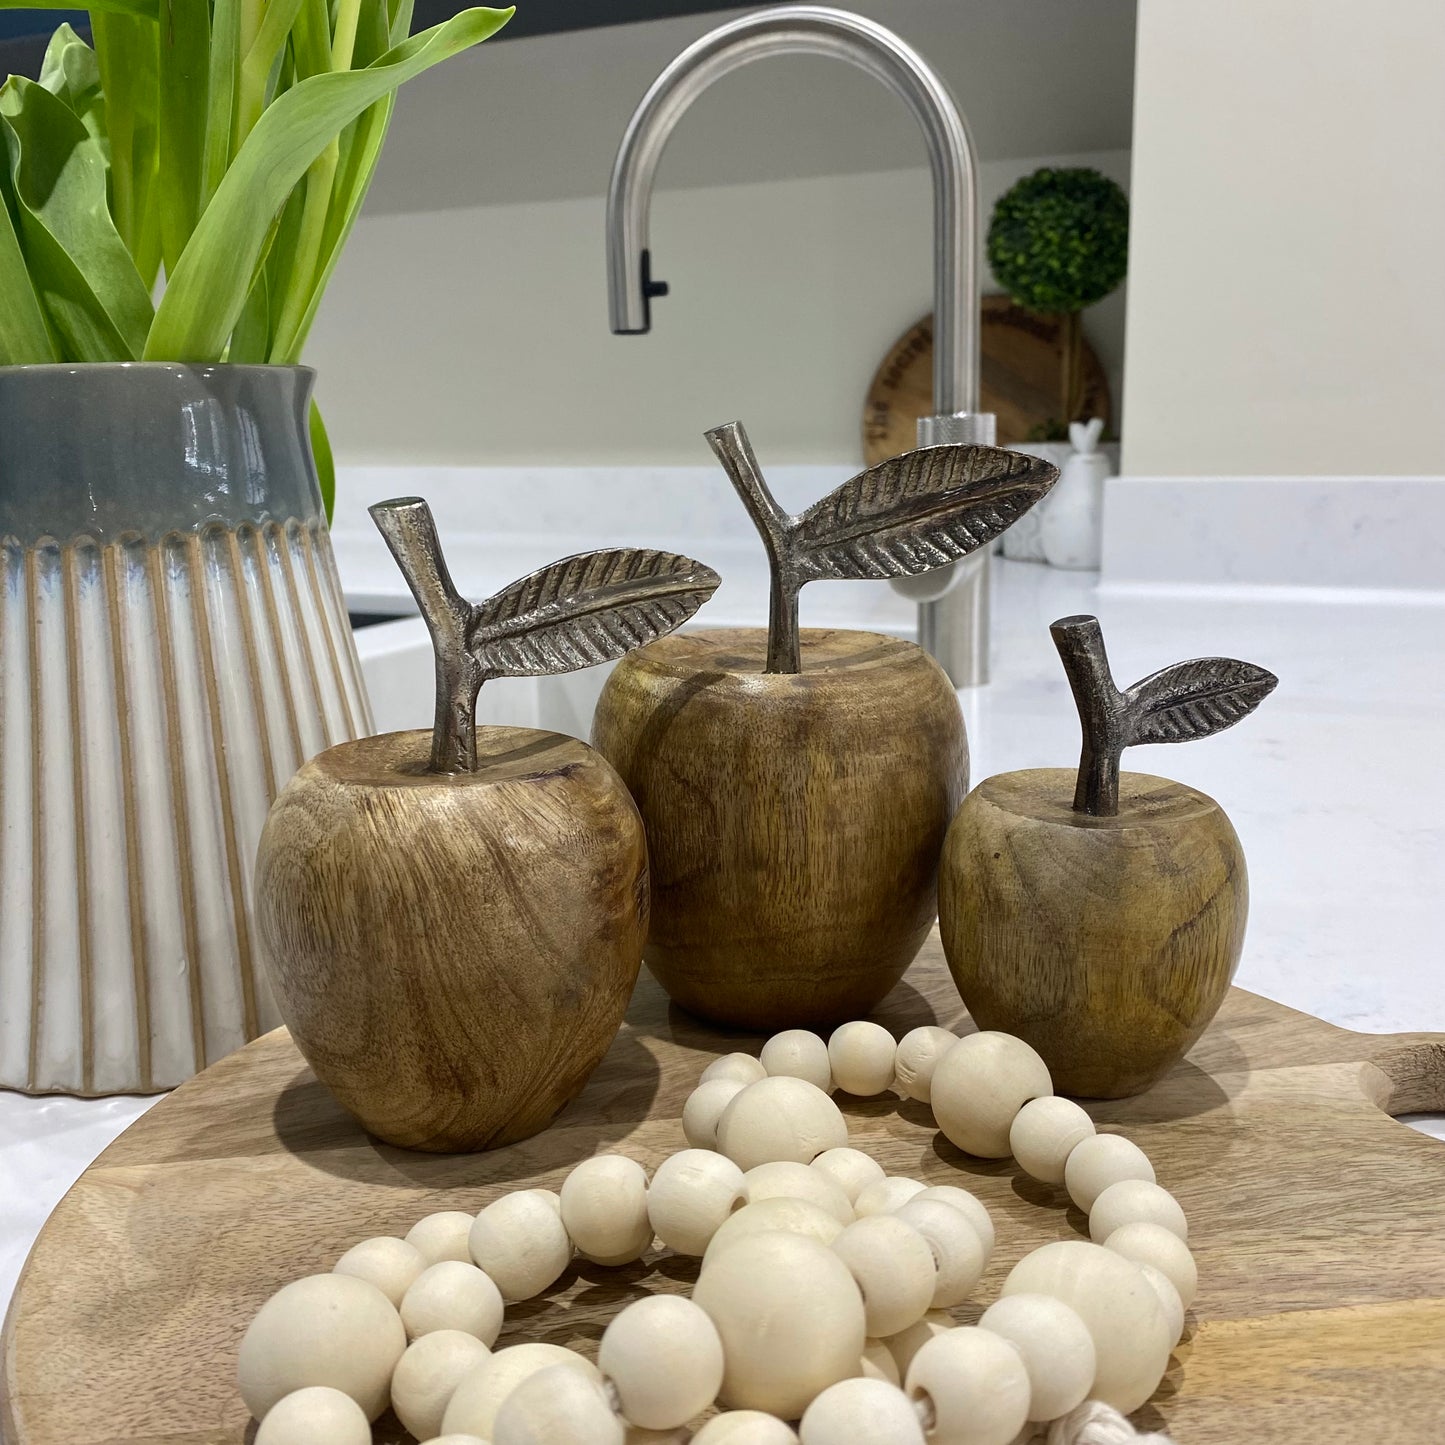 Wooden Apples with Metal Stalk - options